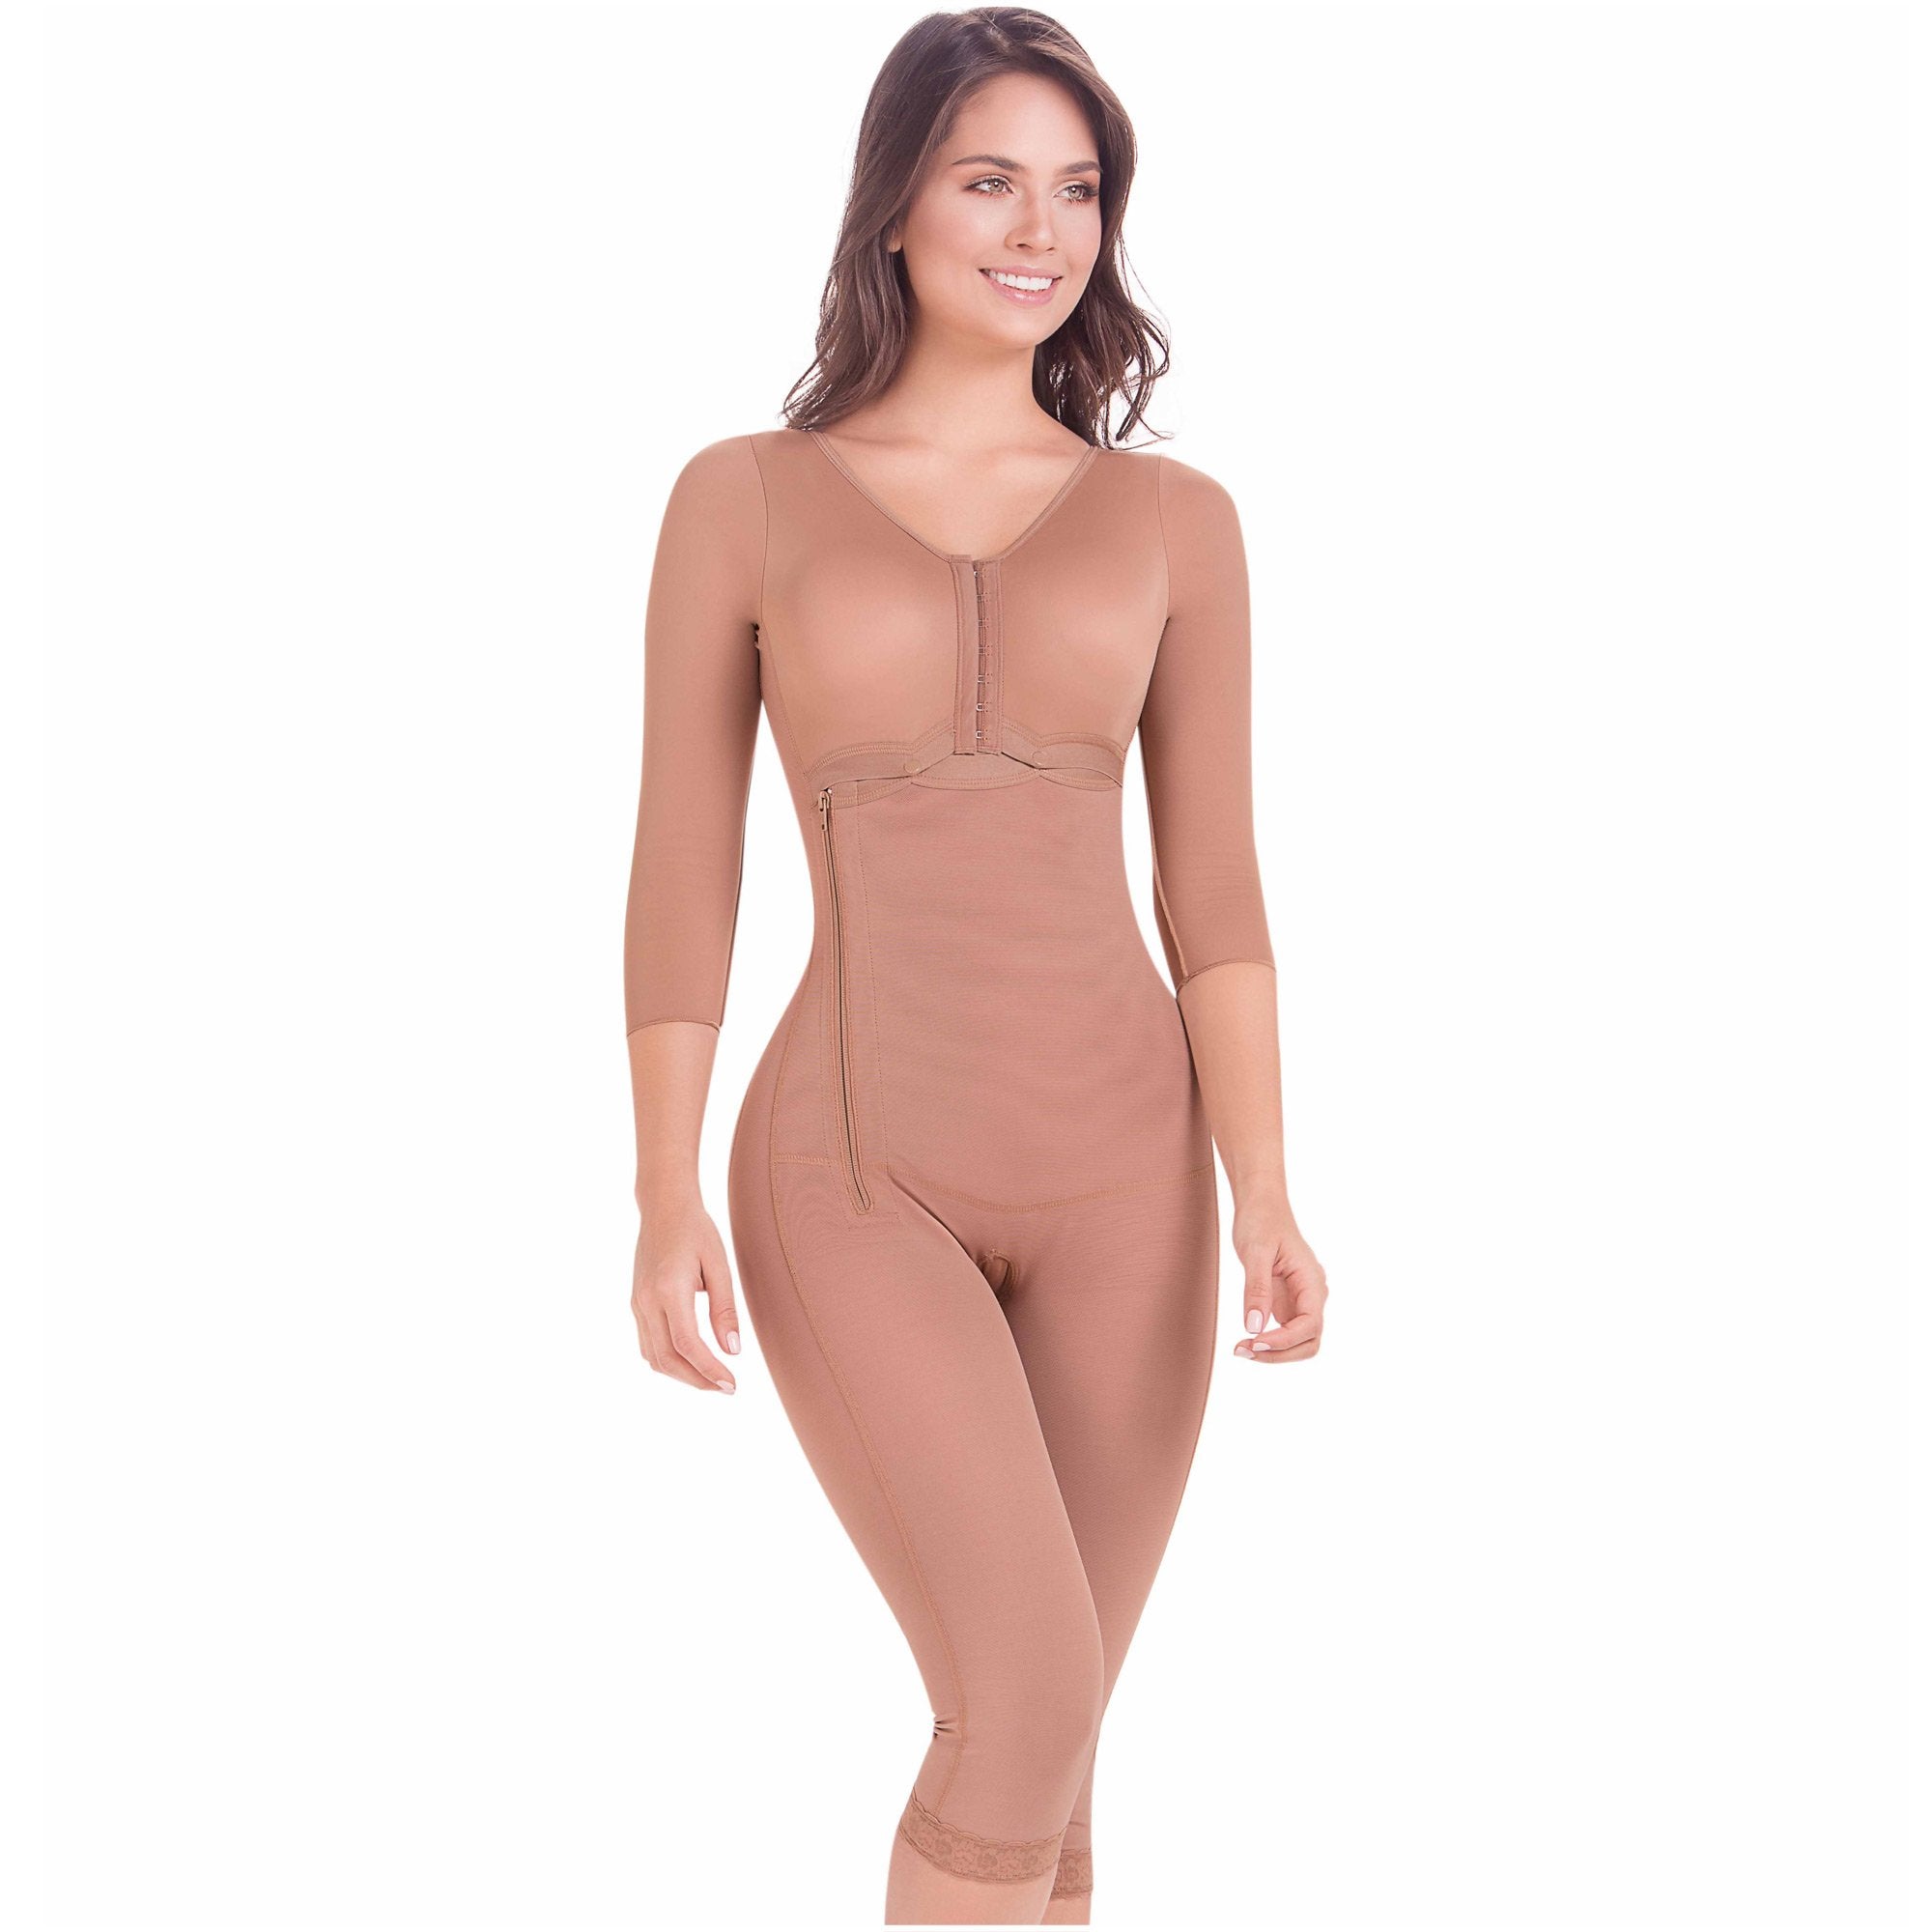 FAJAS COLOMBIANAS REDUCTORAS POST-SURGERY SHAPEWEAR STAGE 2 GIRDLE MARIA E  9412